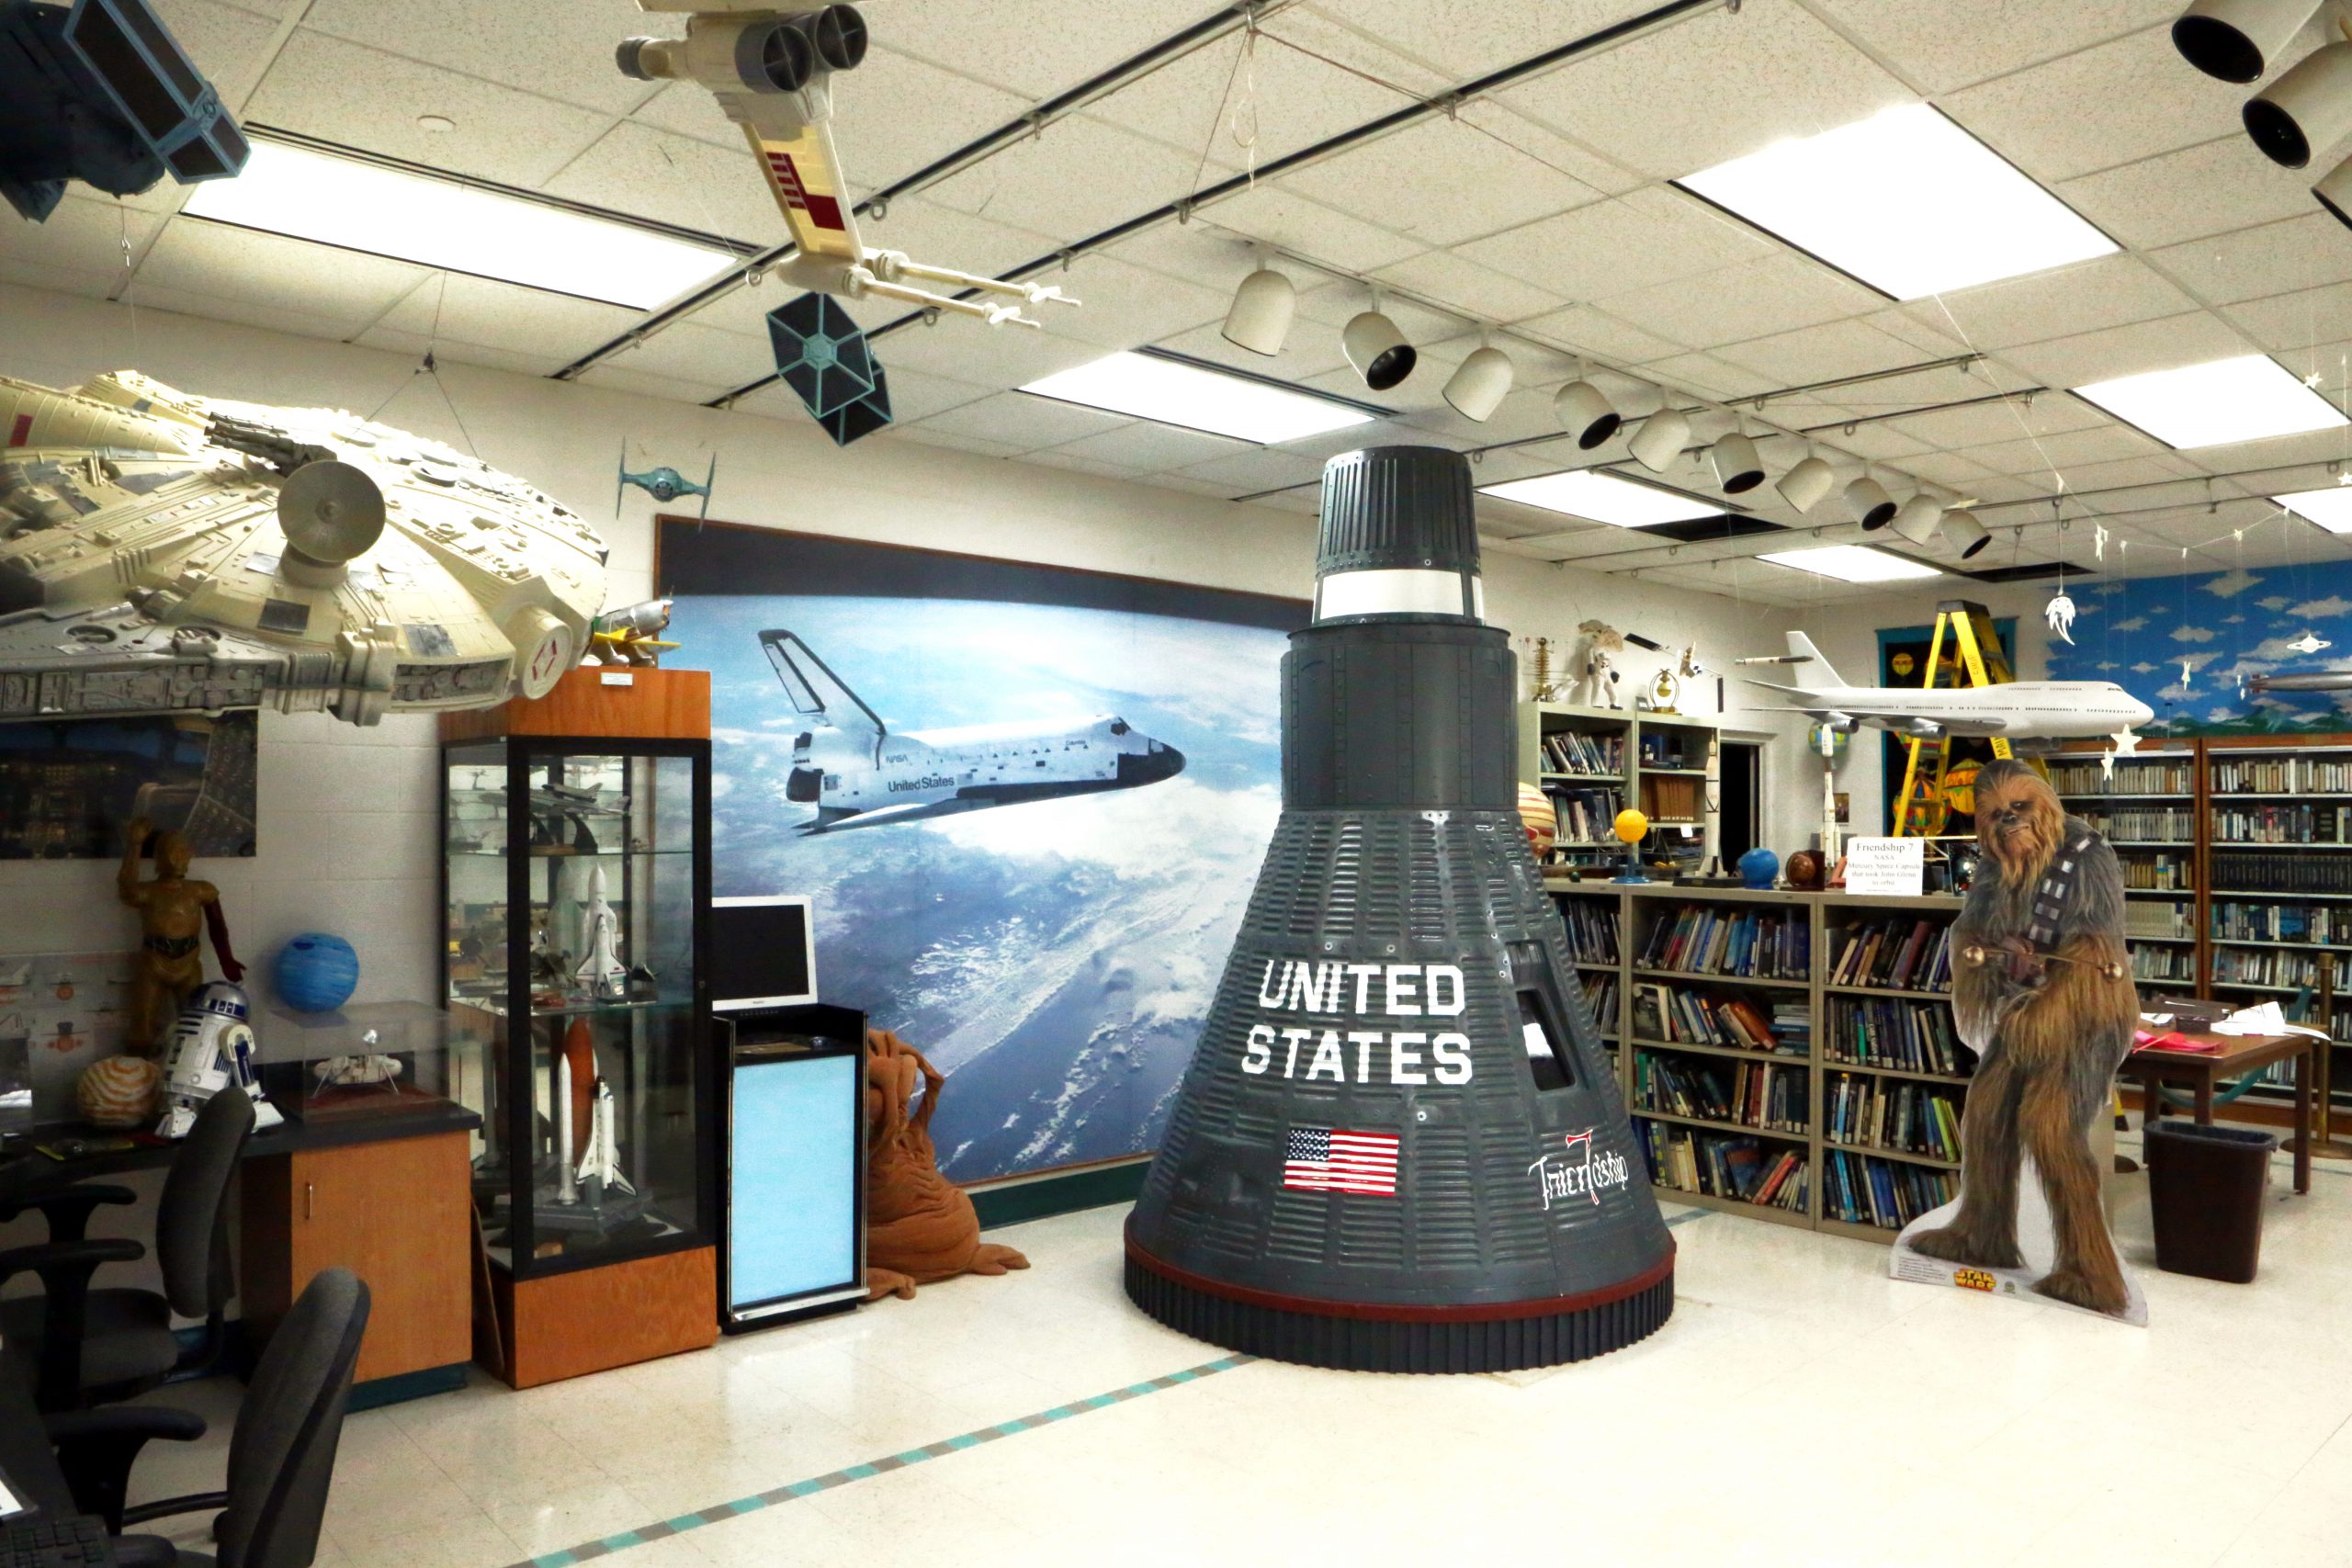 Aerospace exploration lab filled with books, rocket models, a Chewbacca cardboard sandee and more.